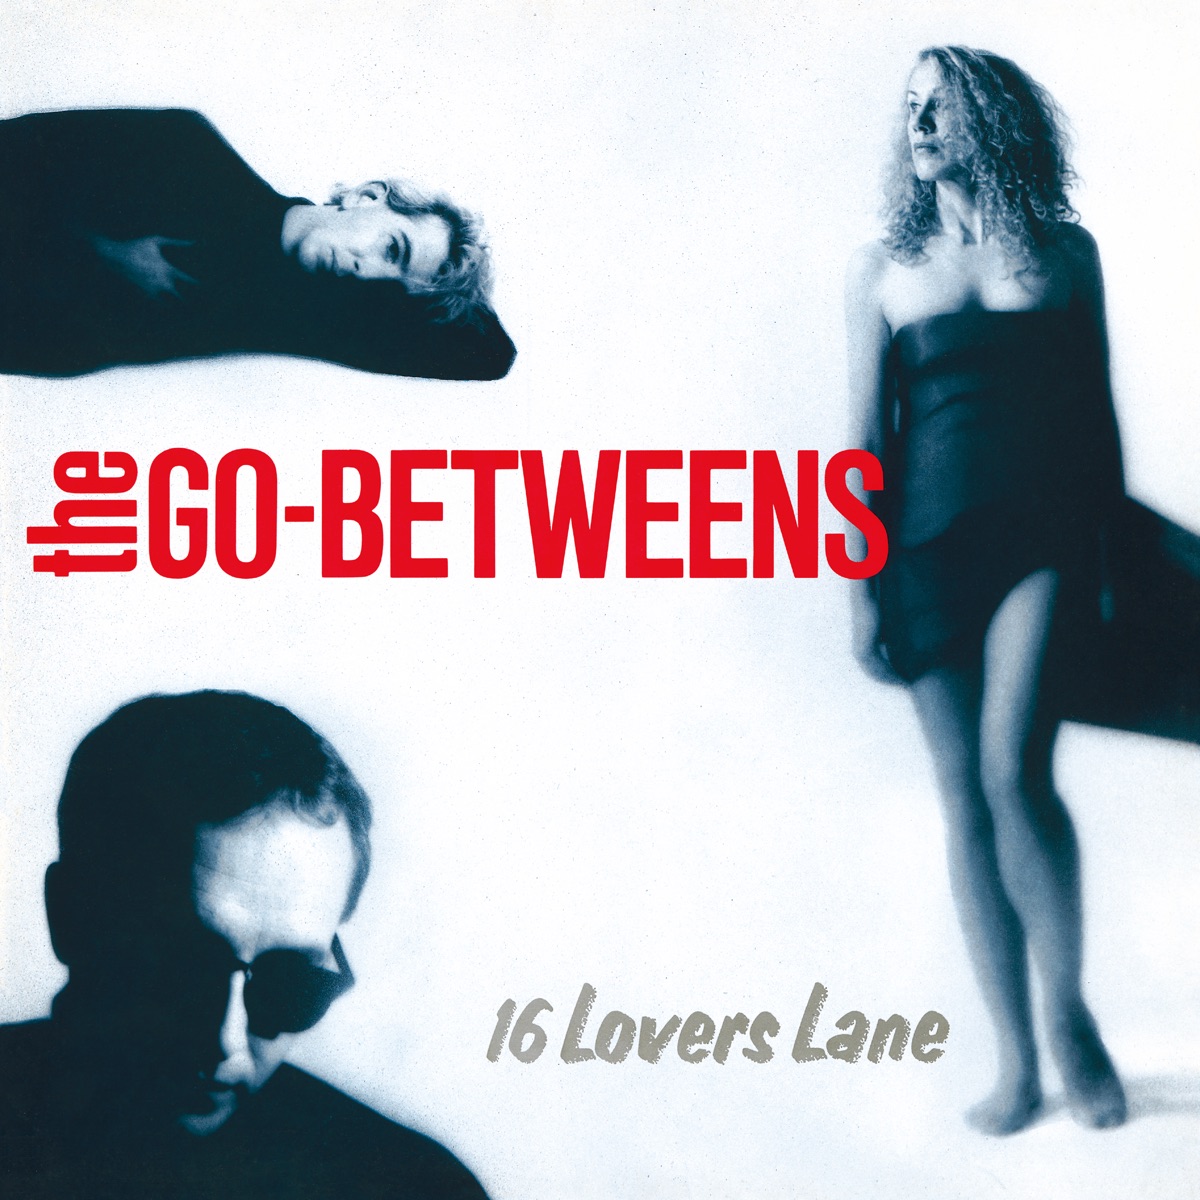 Liberty Belle and the Black Diamond Express (Remastered) by The Go-Betweens  on Apple Music